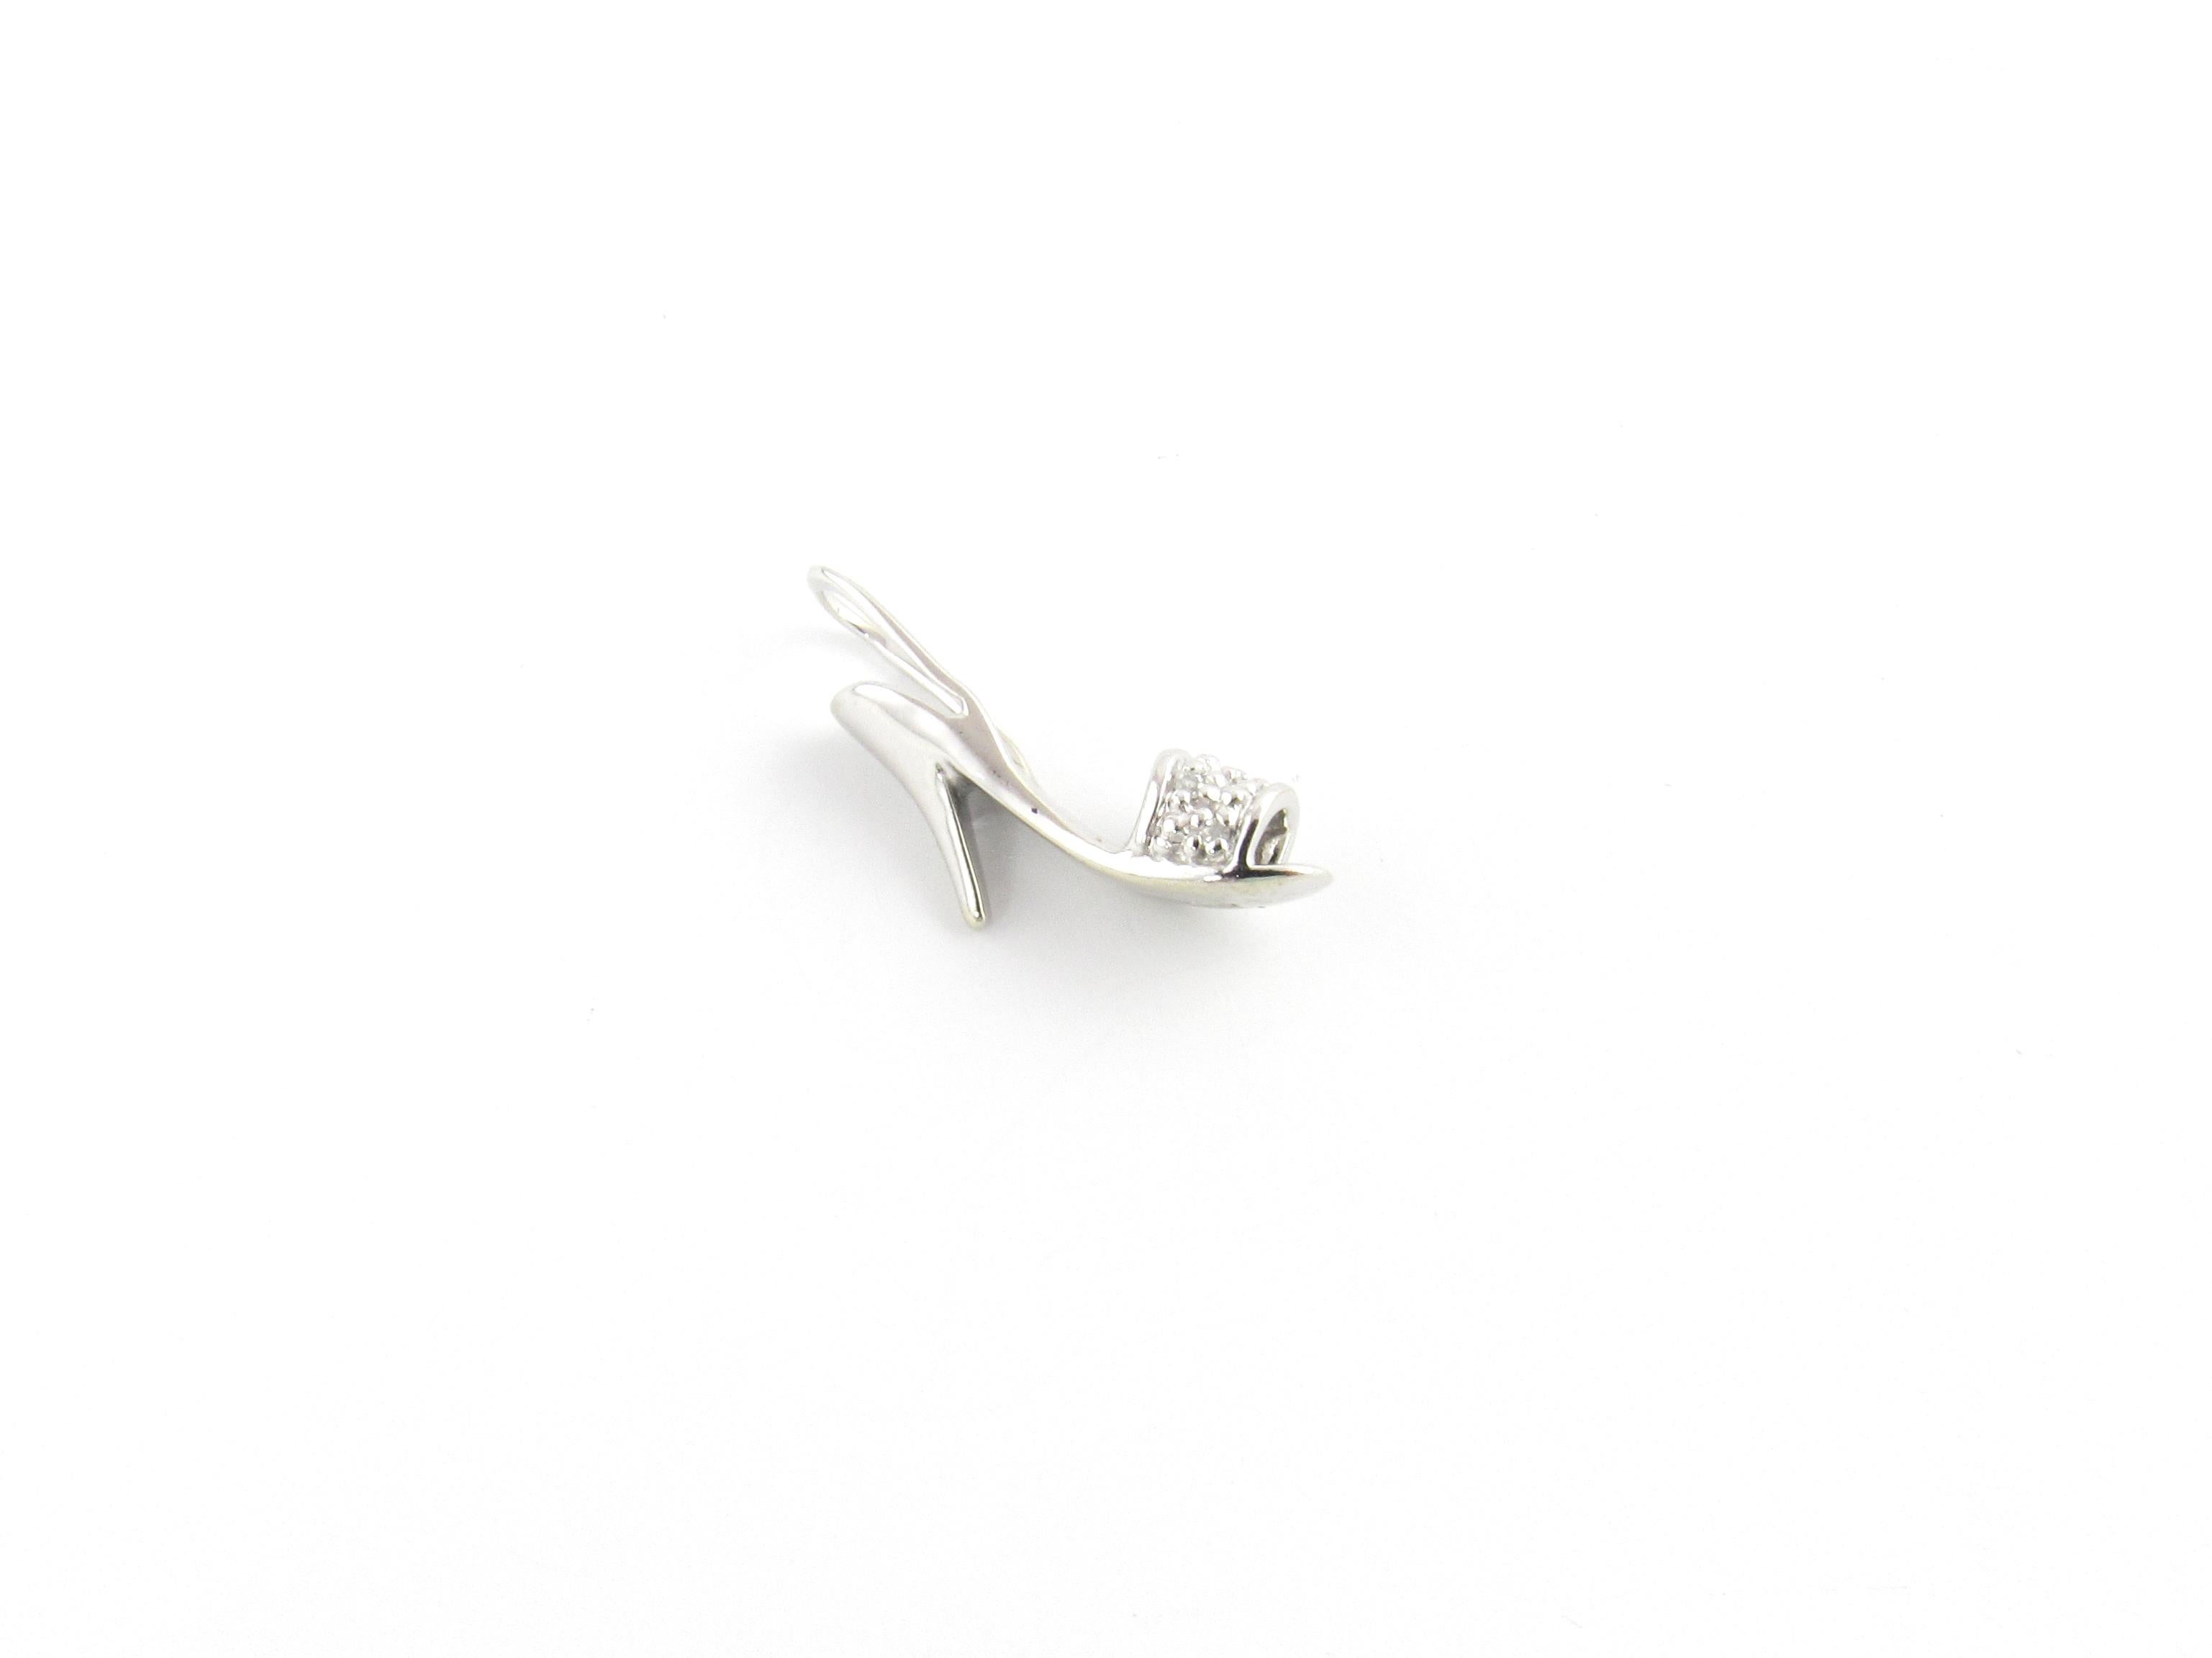 Vintage 10 Karat White Gold and Diamond High-Heeled Sandal Charm-

Time to put your dancing shoes on!

This lovely 3D charm features a miniature high-heeled sandal accented with six round single cut diamonds set in classic 10K white